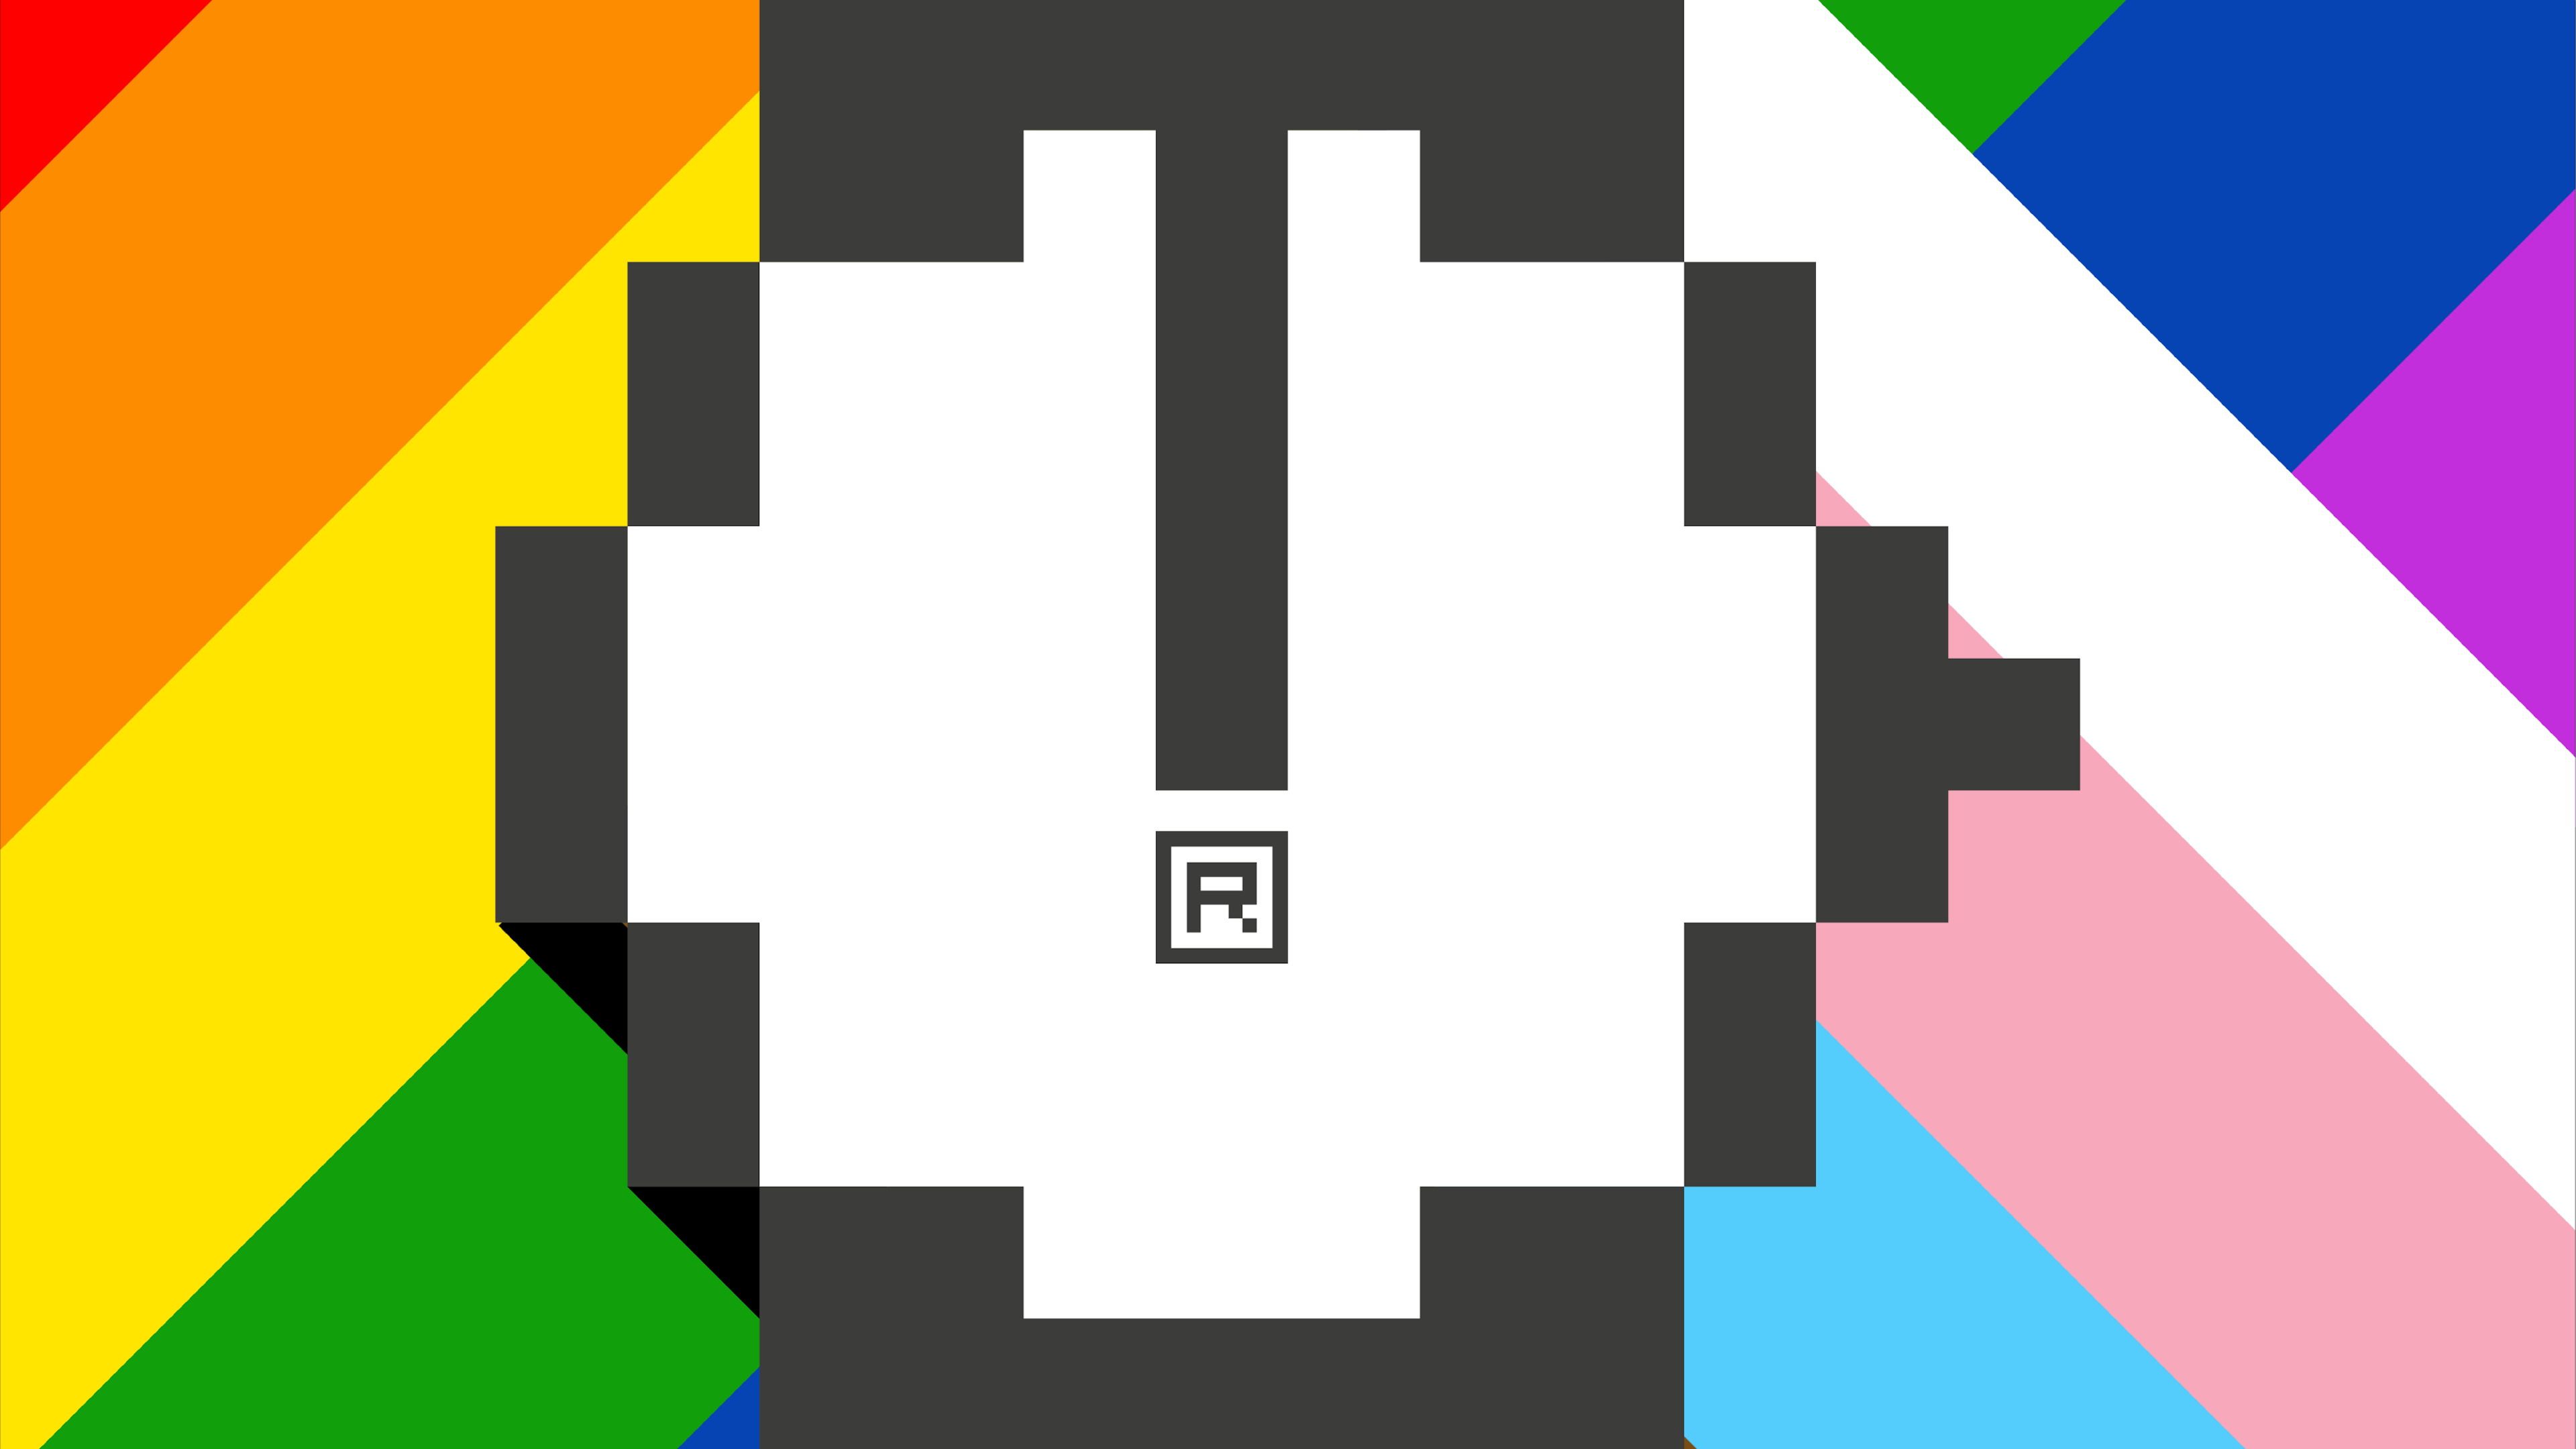 featured image - The Rainbowfication of the Hacker Noon Logo: Happy Pride Month!